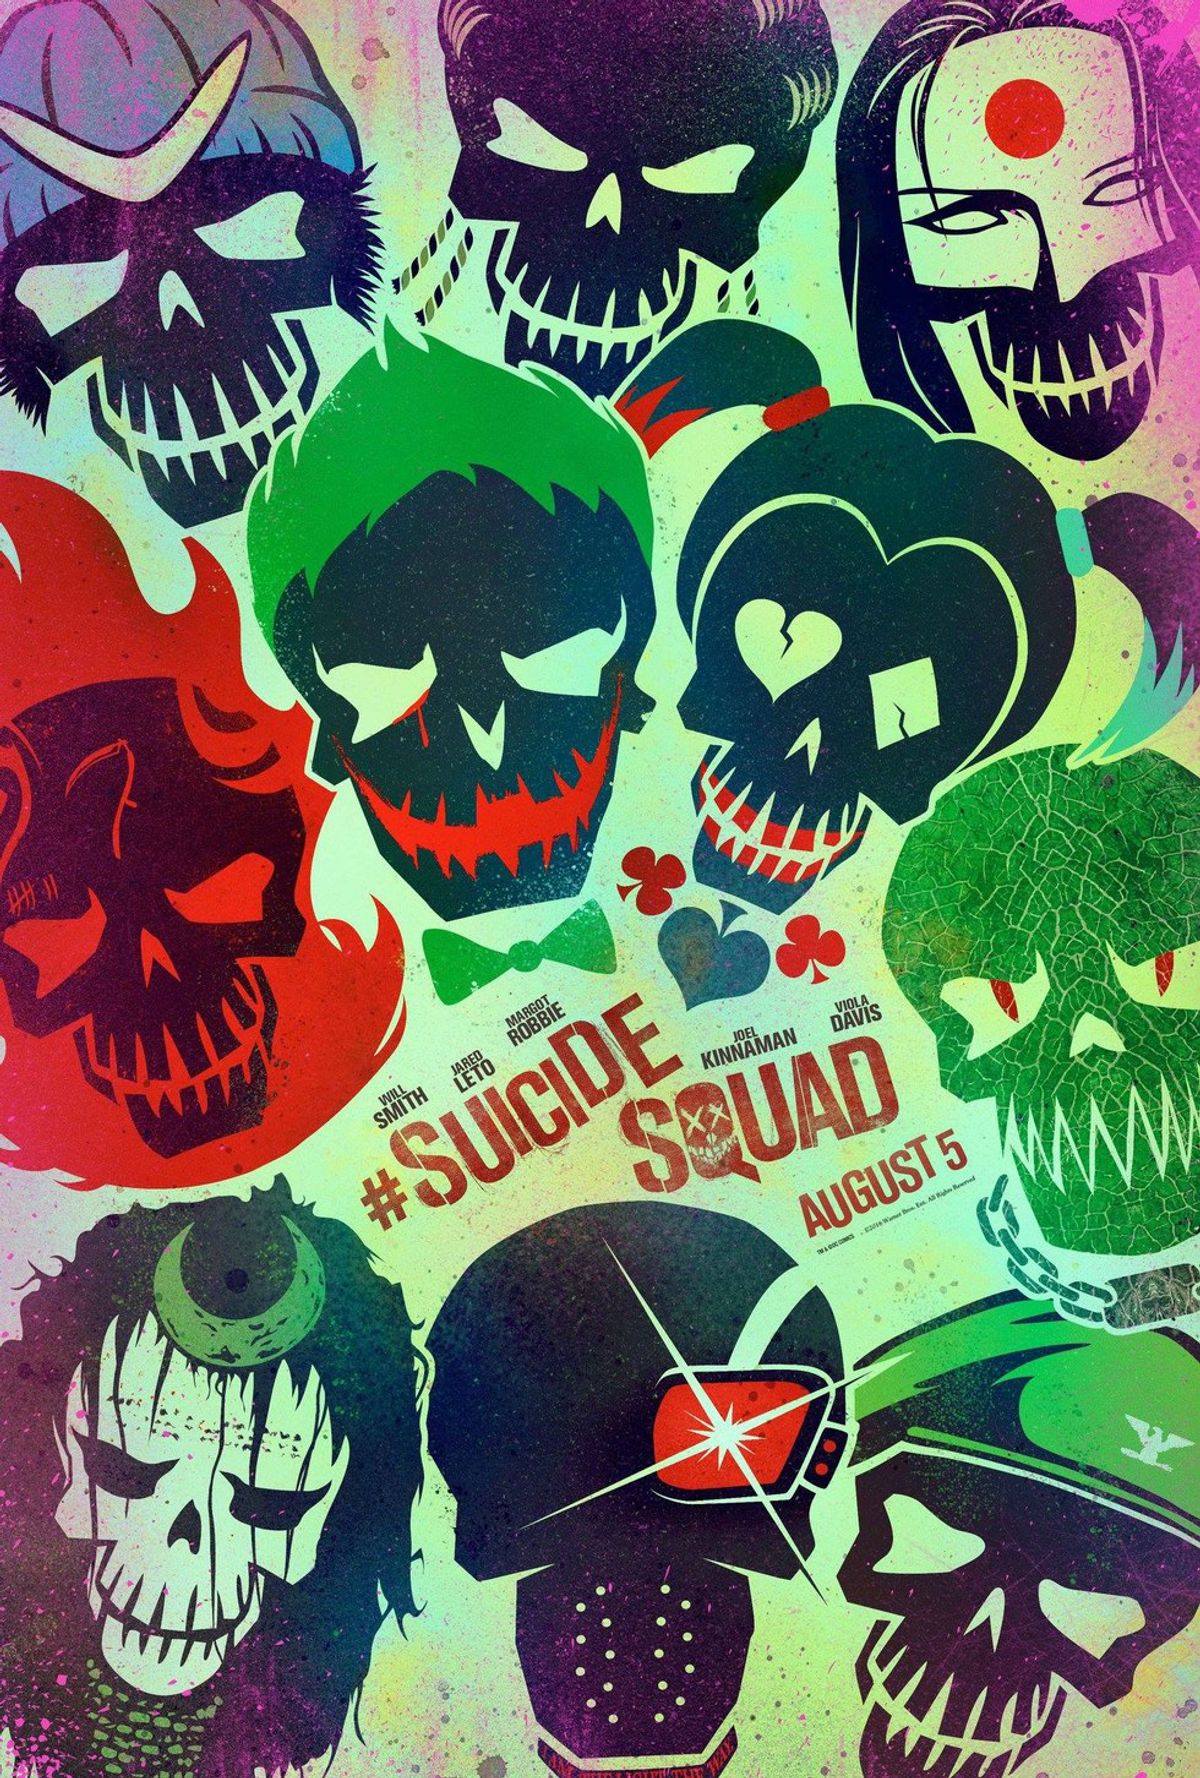 A Review Of "Suicide Squad" -- A Bad Rendition Of The Comics